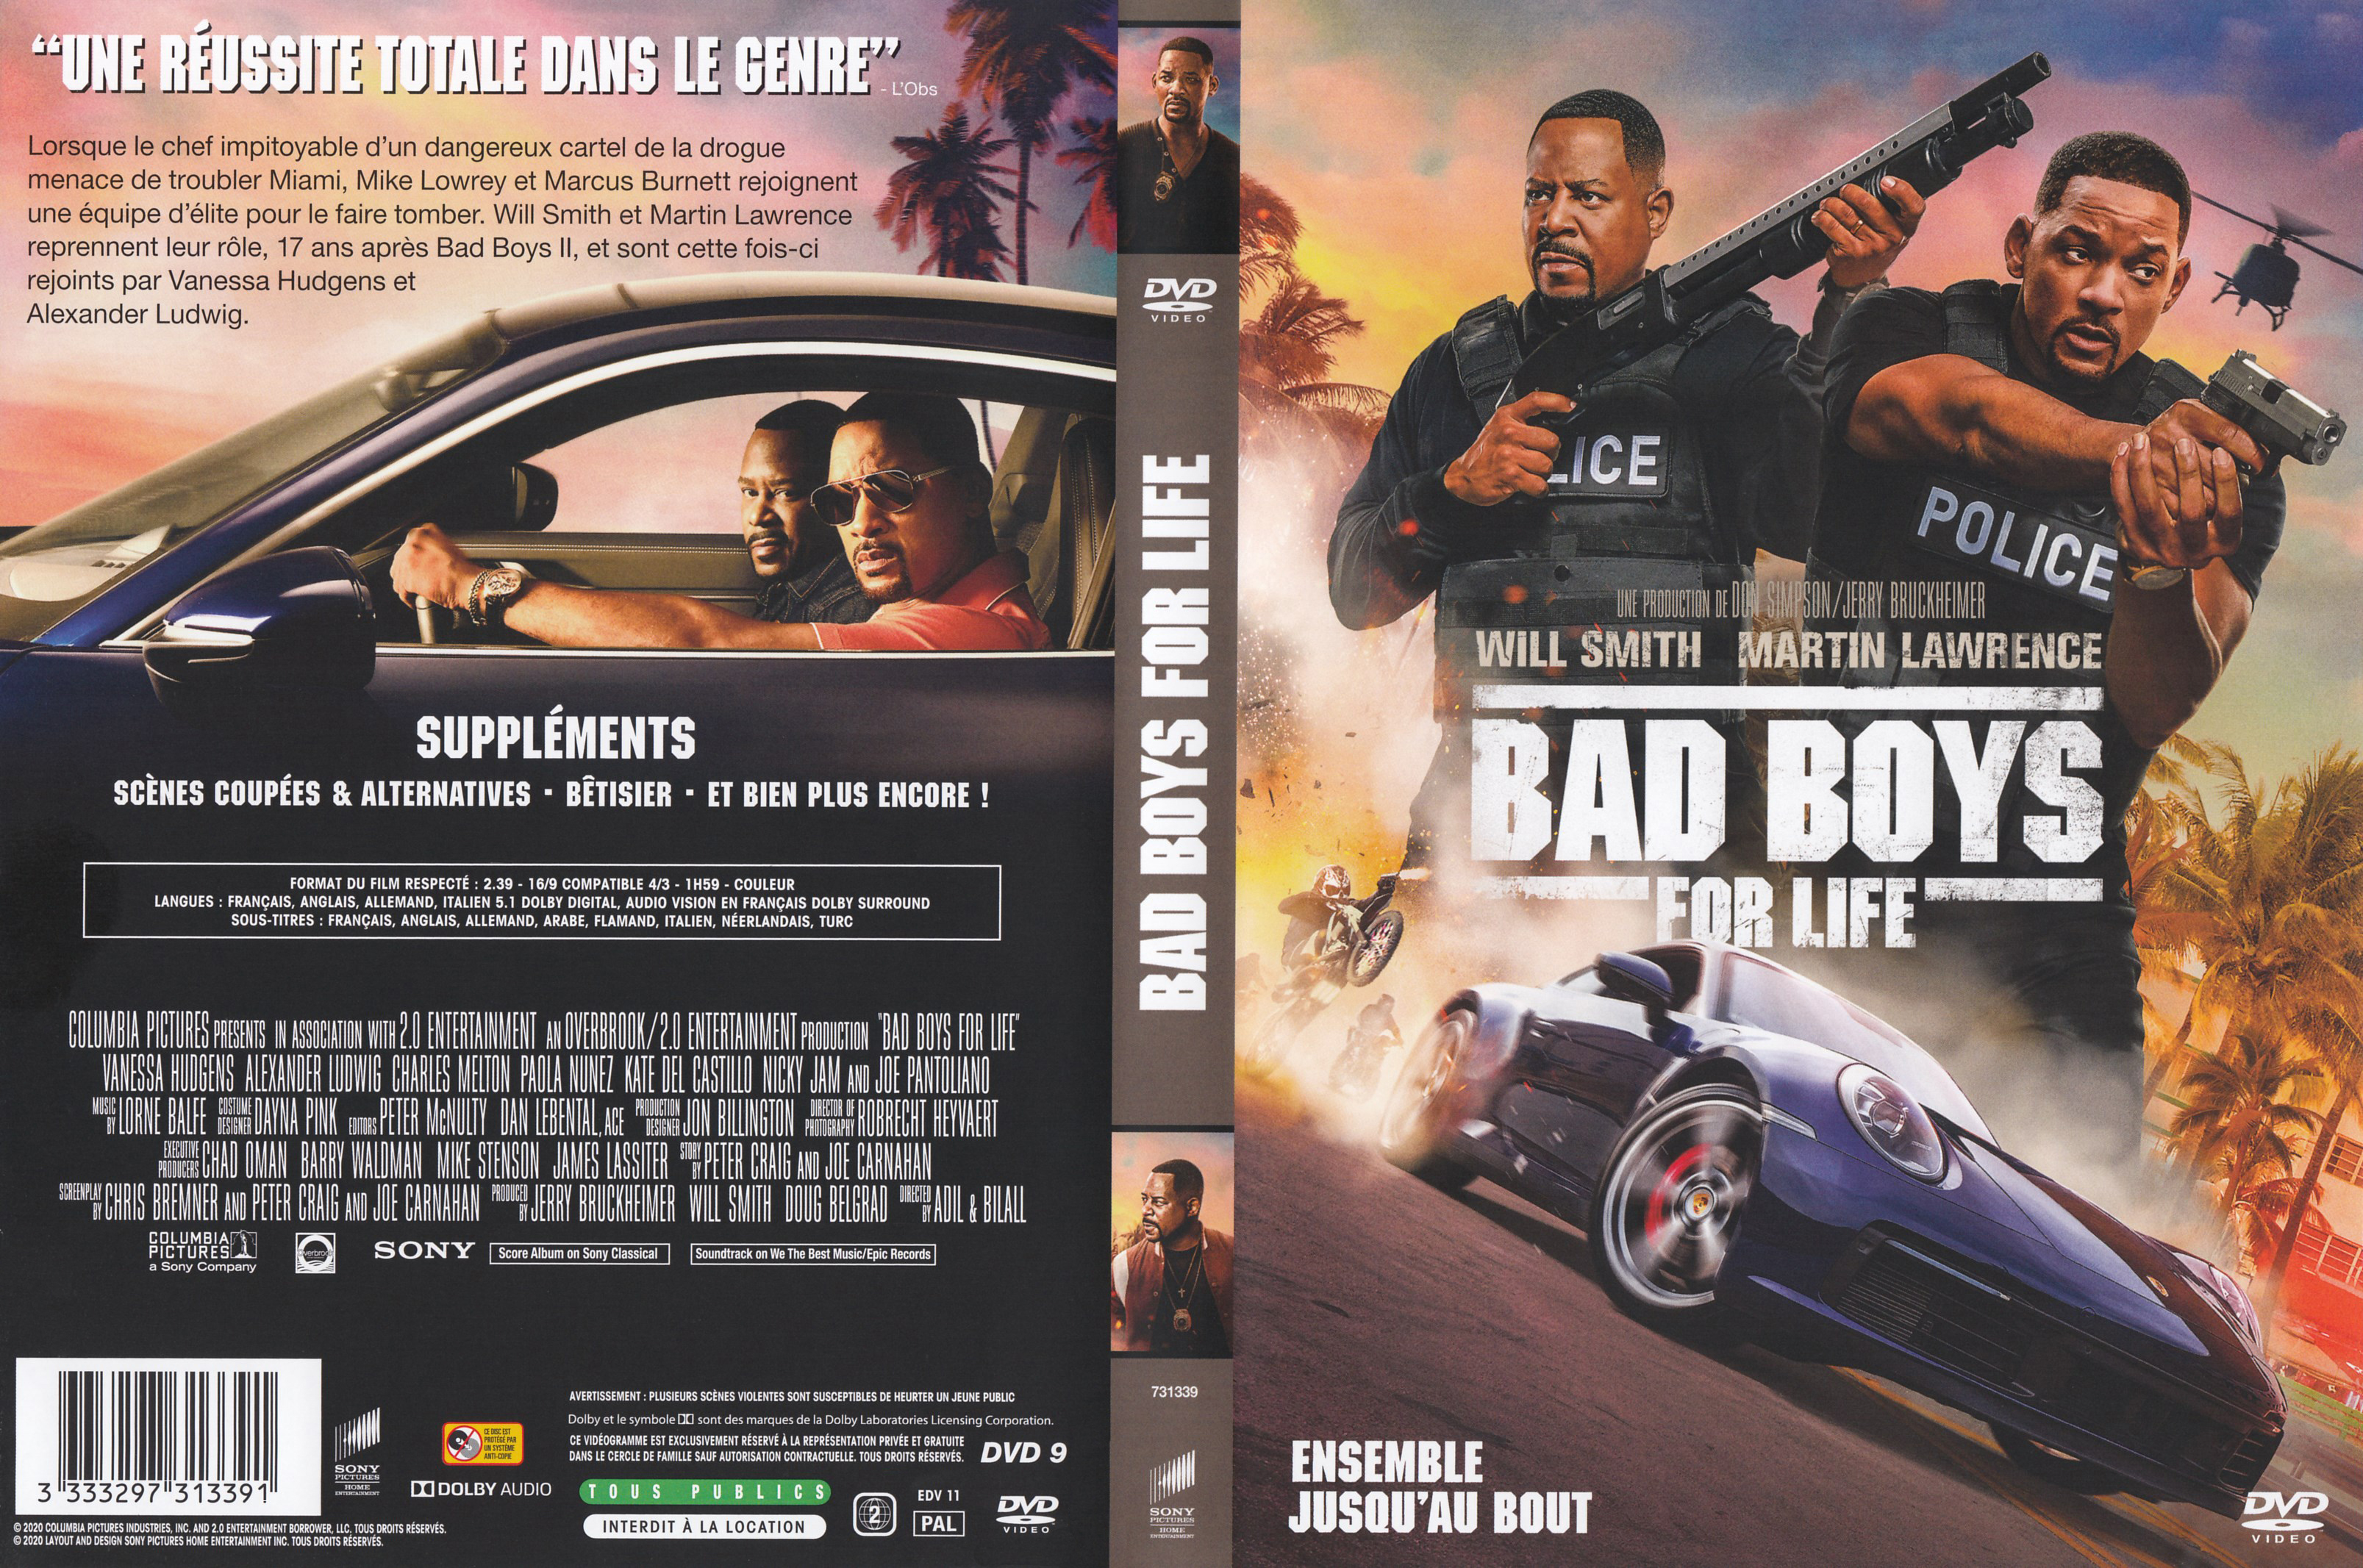 Jaquette DVD Bad boys for life